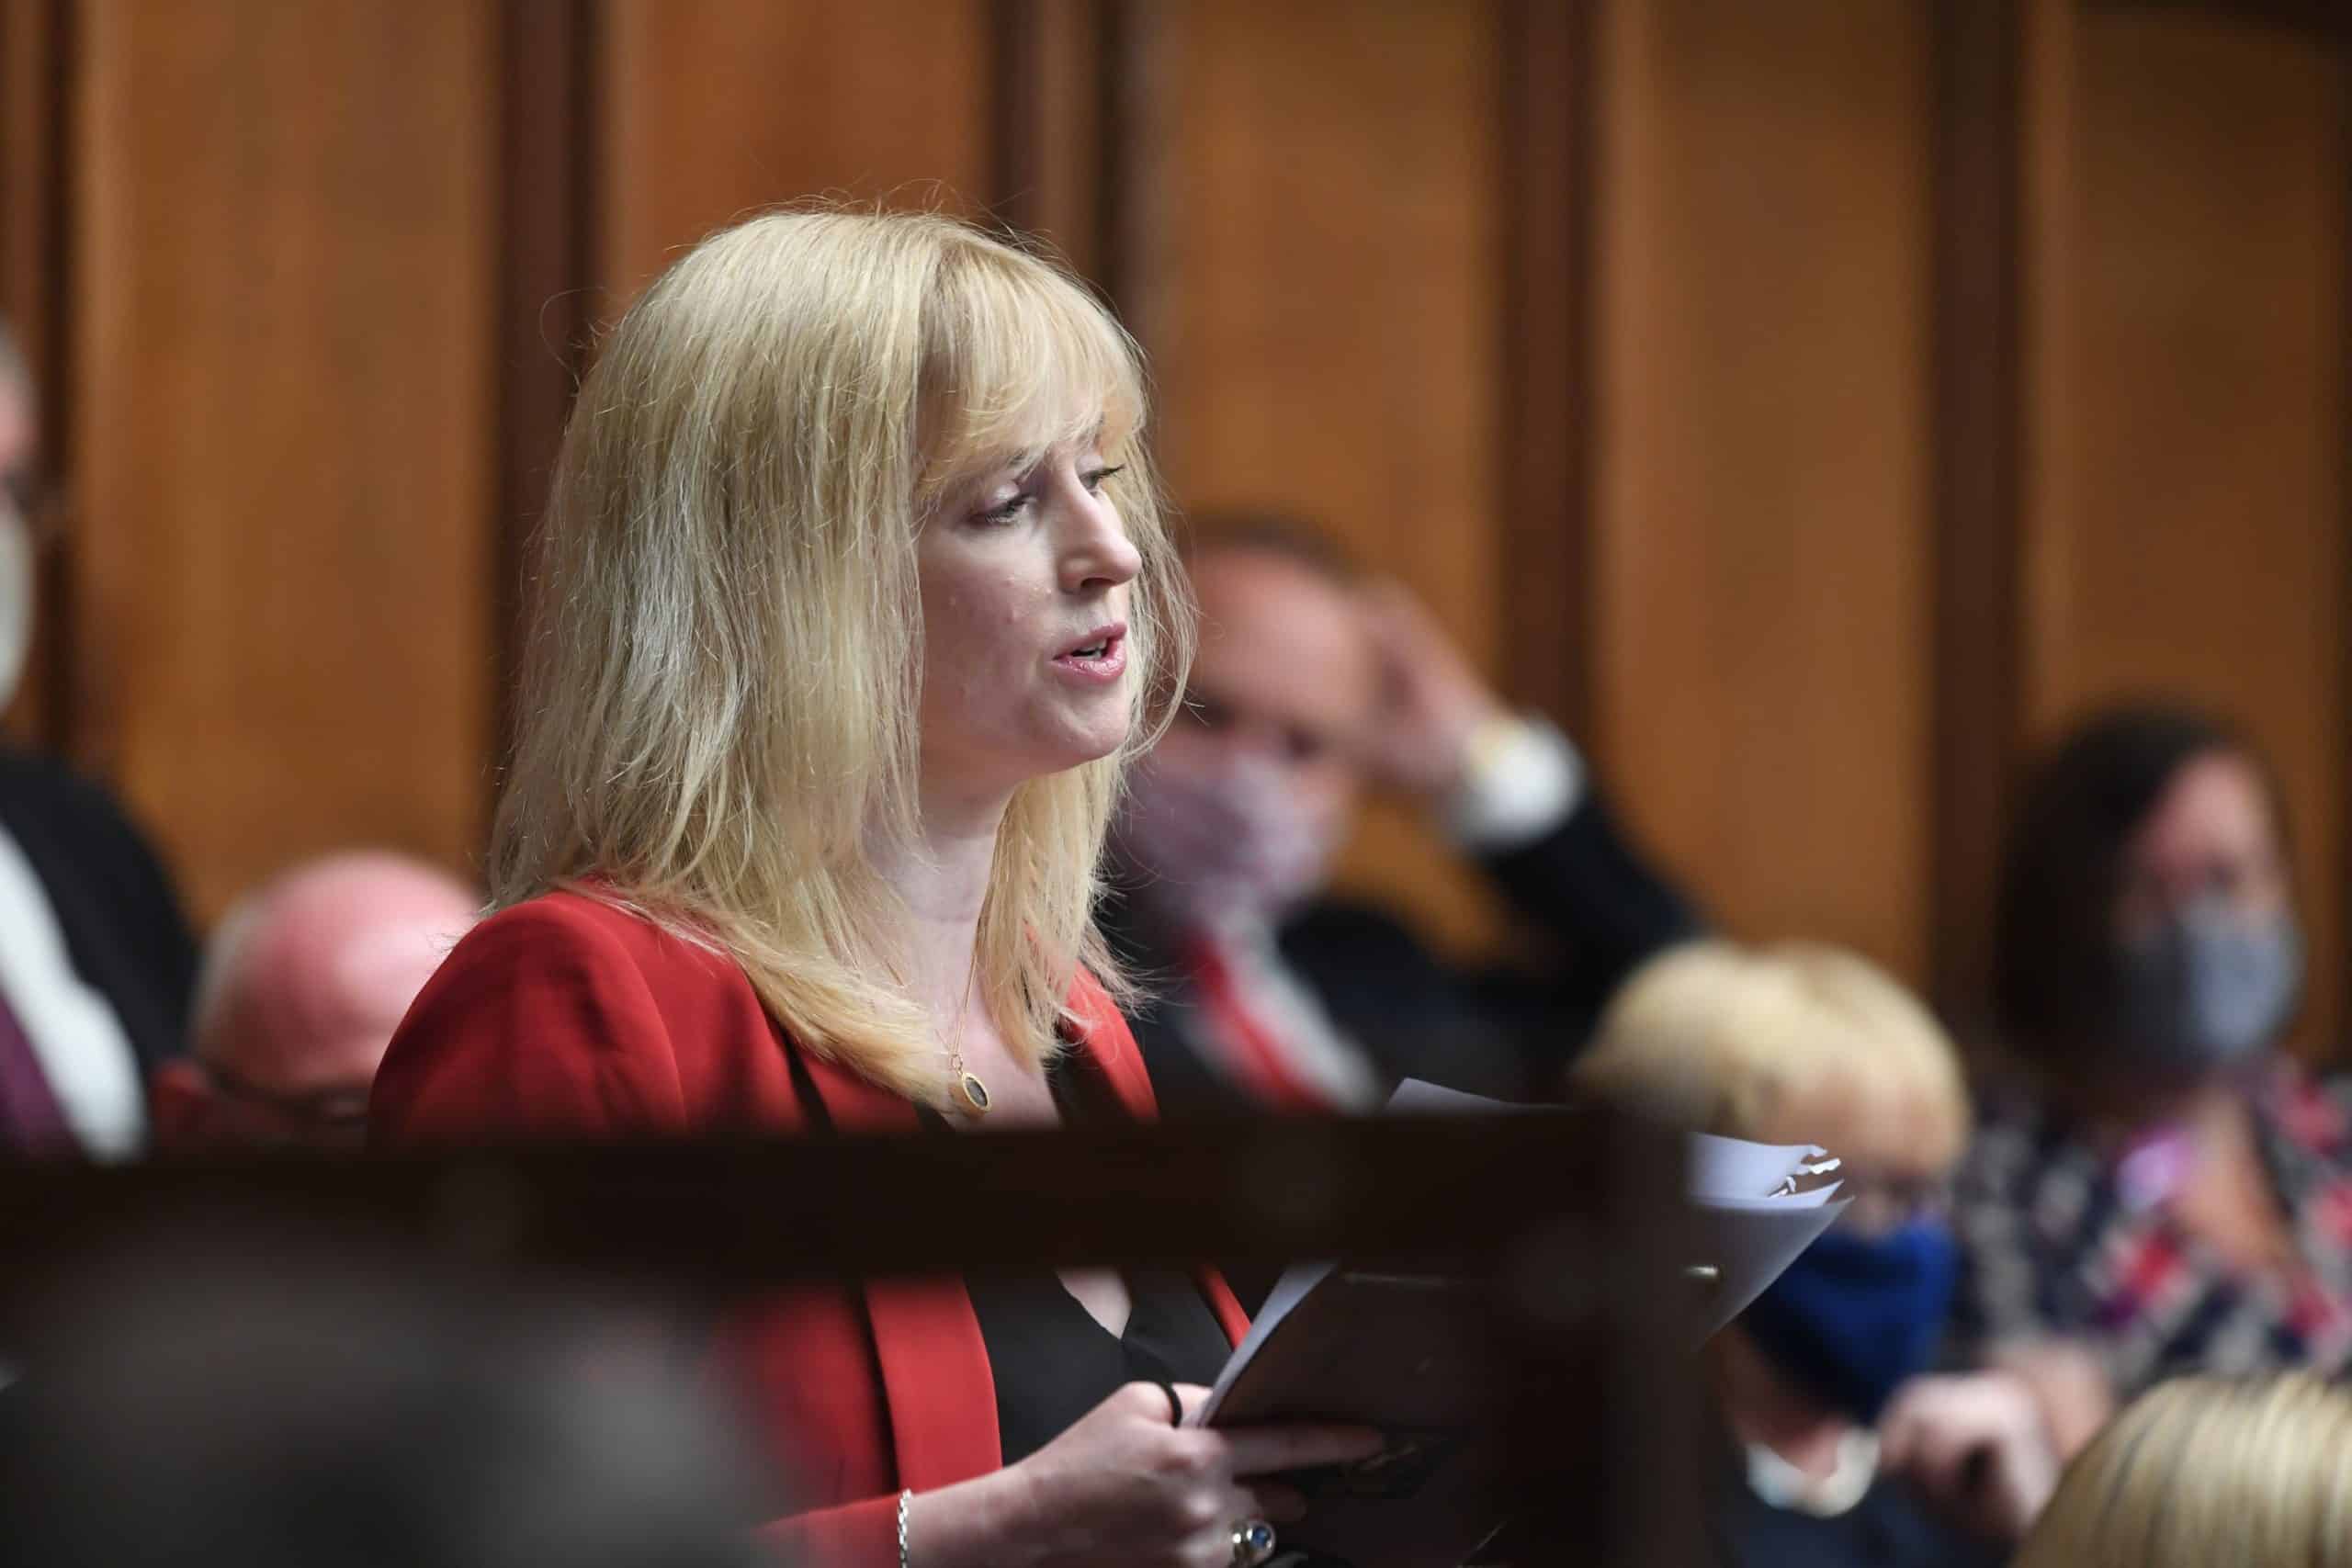 Tories invite Rosie Duffield to defect amid transgender fallout